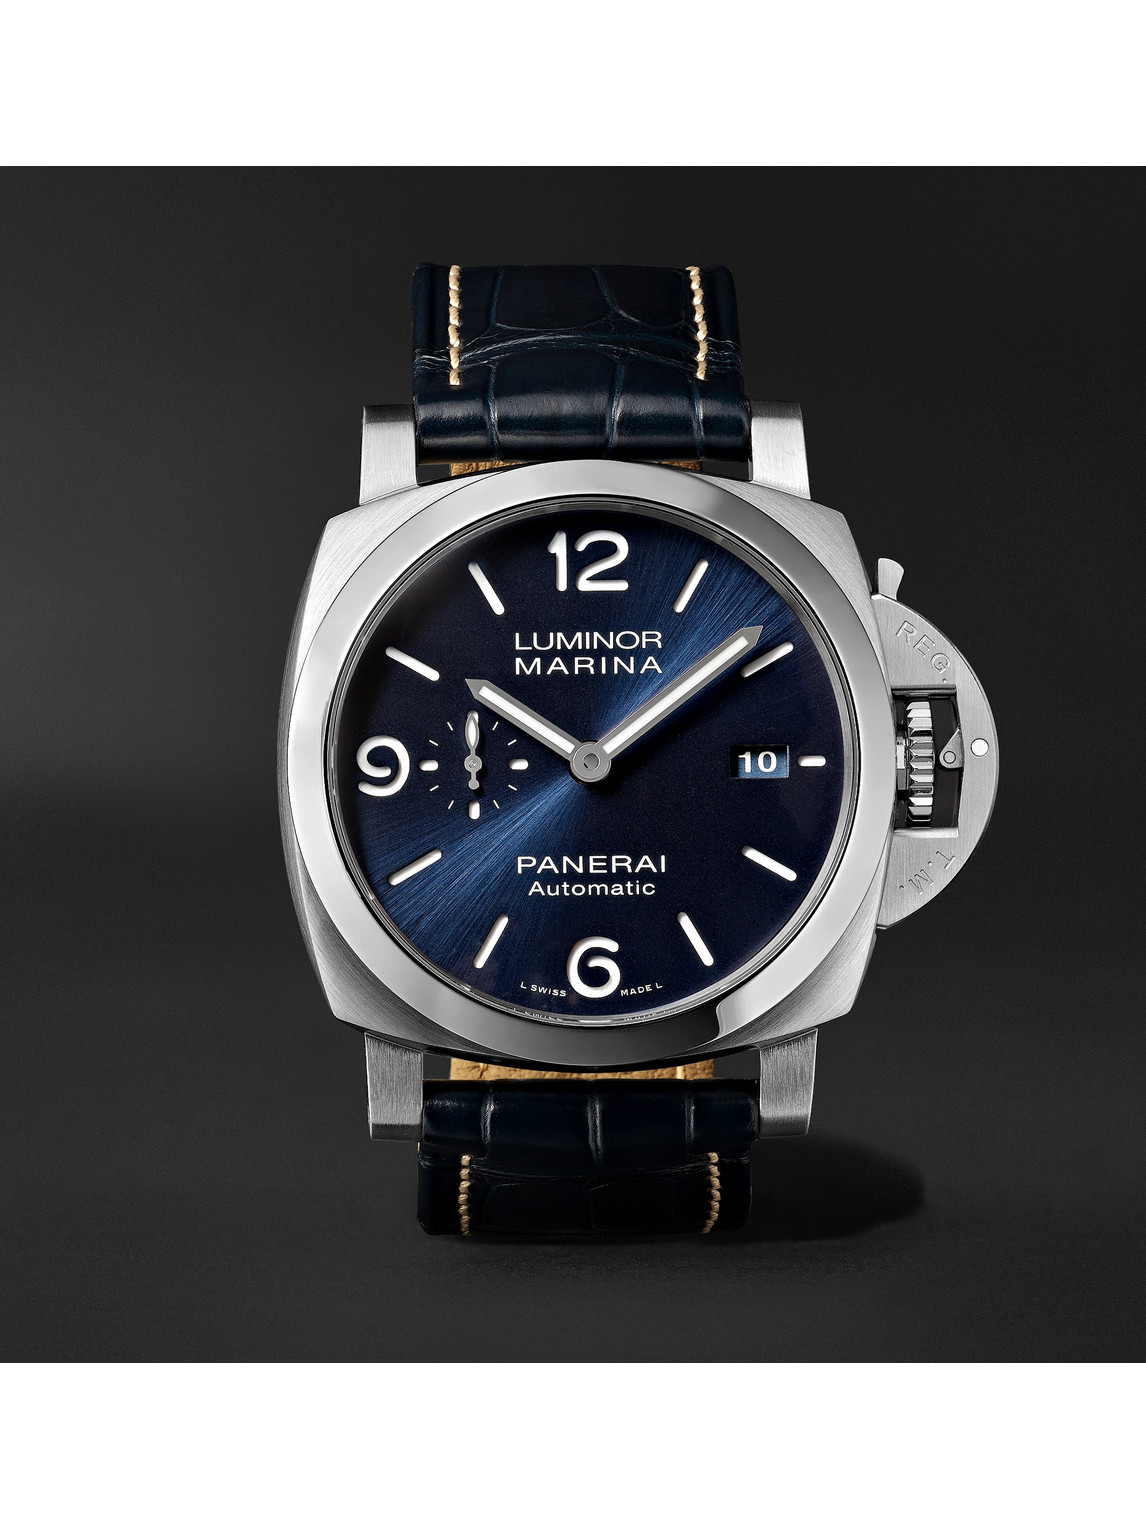 Panerai Luminor Marina Automatic 44mm Stainless Steel And Alligator Watch, Ref. No. Pam01313 In Blue